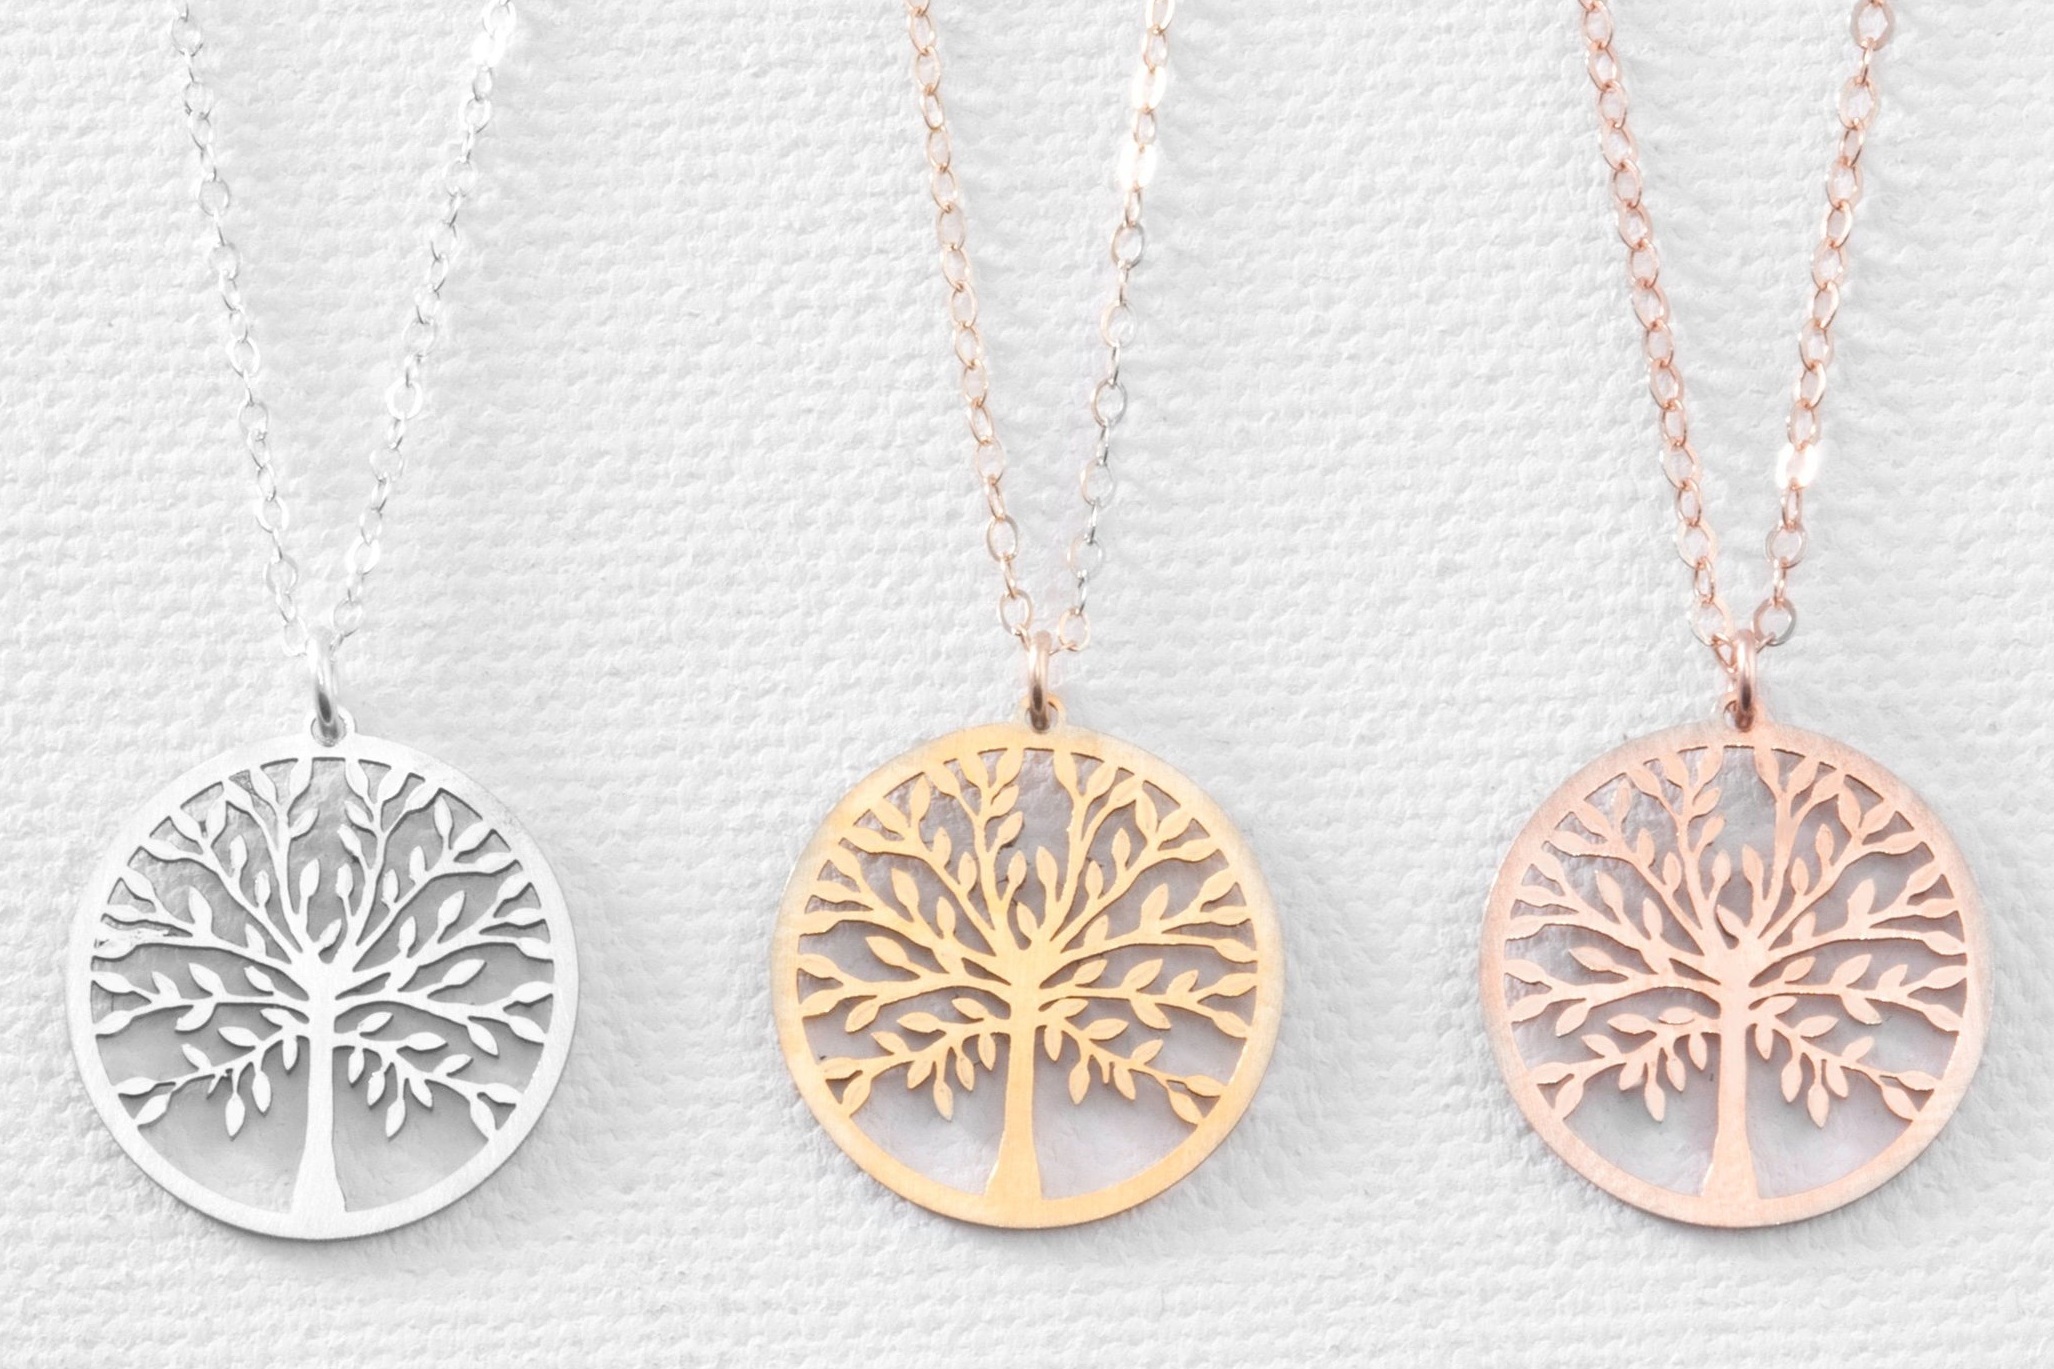  There are quite a few lovely choices on Etsy with Tree of Life designs, like this necklace, that are sure to appeal to the family history fan in your life. Search lapel pins, too! 